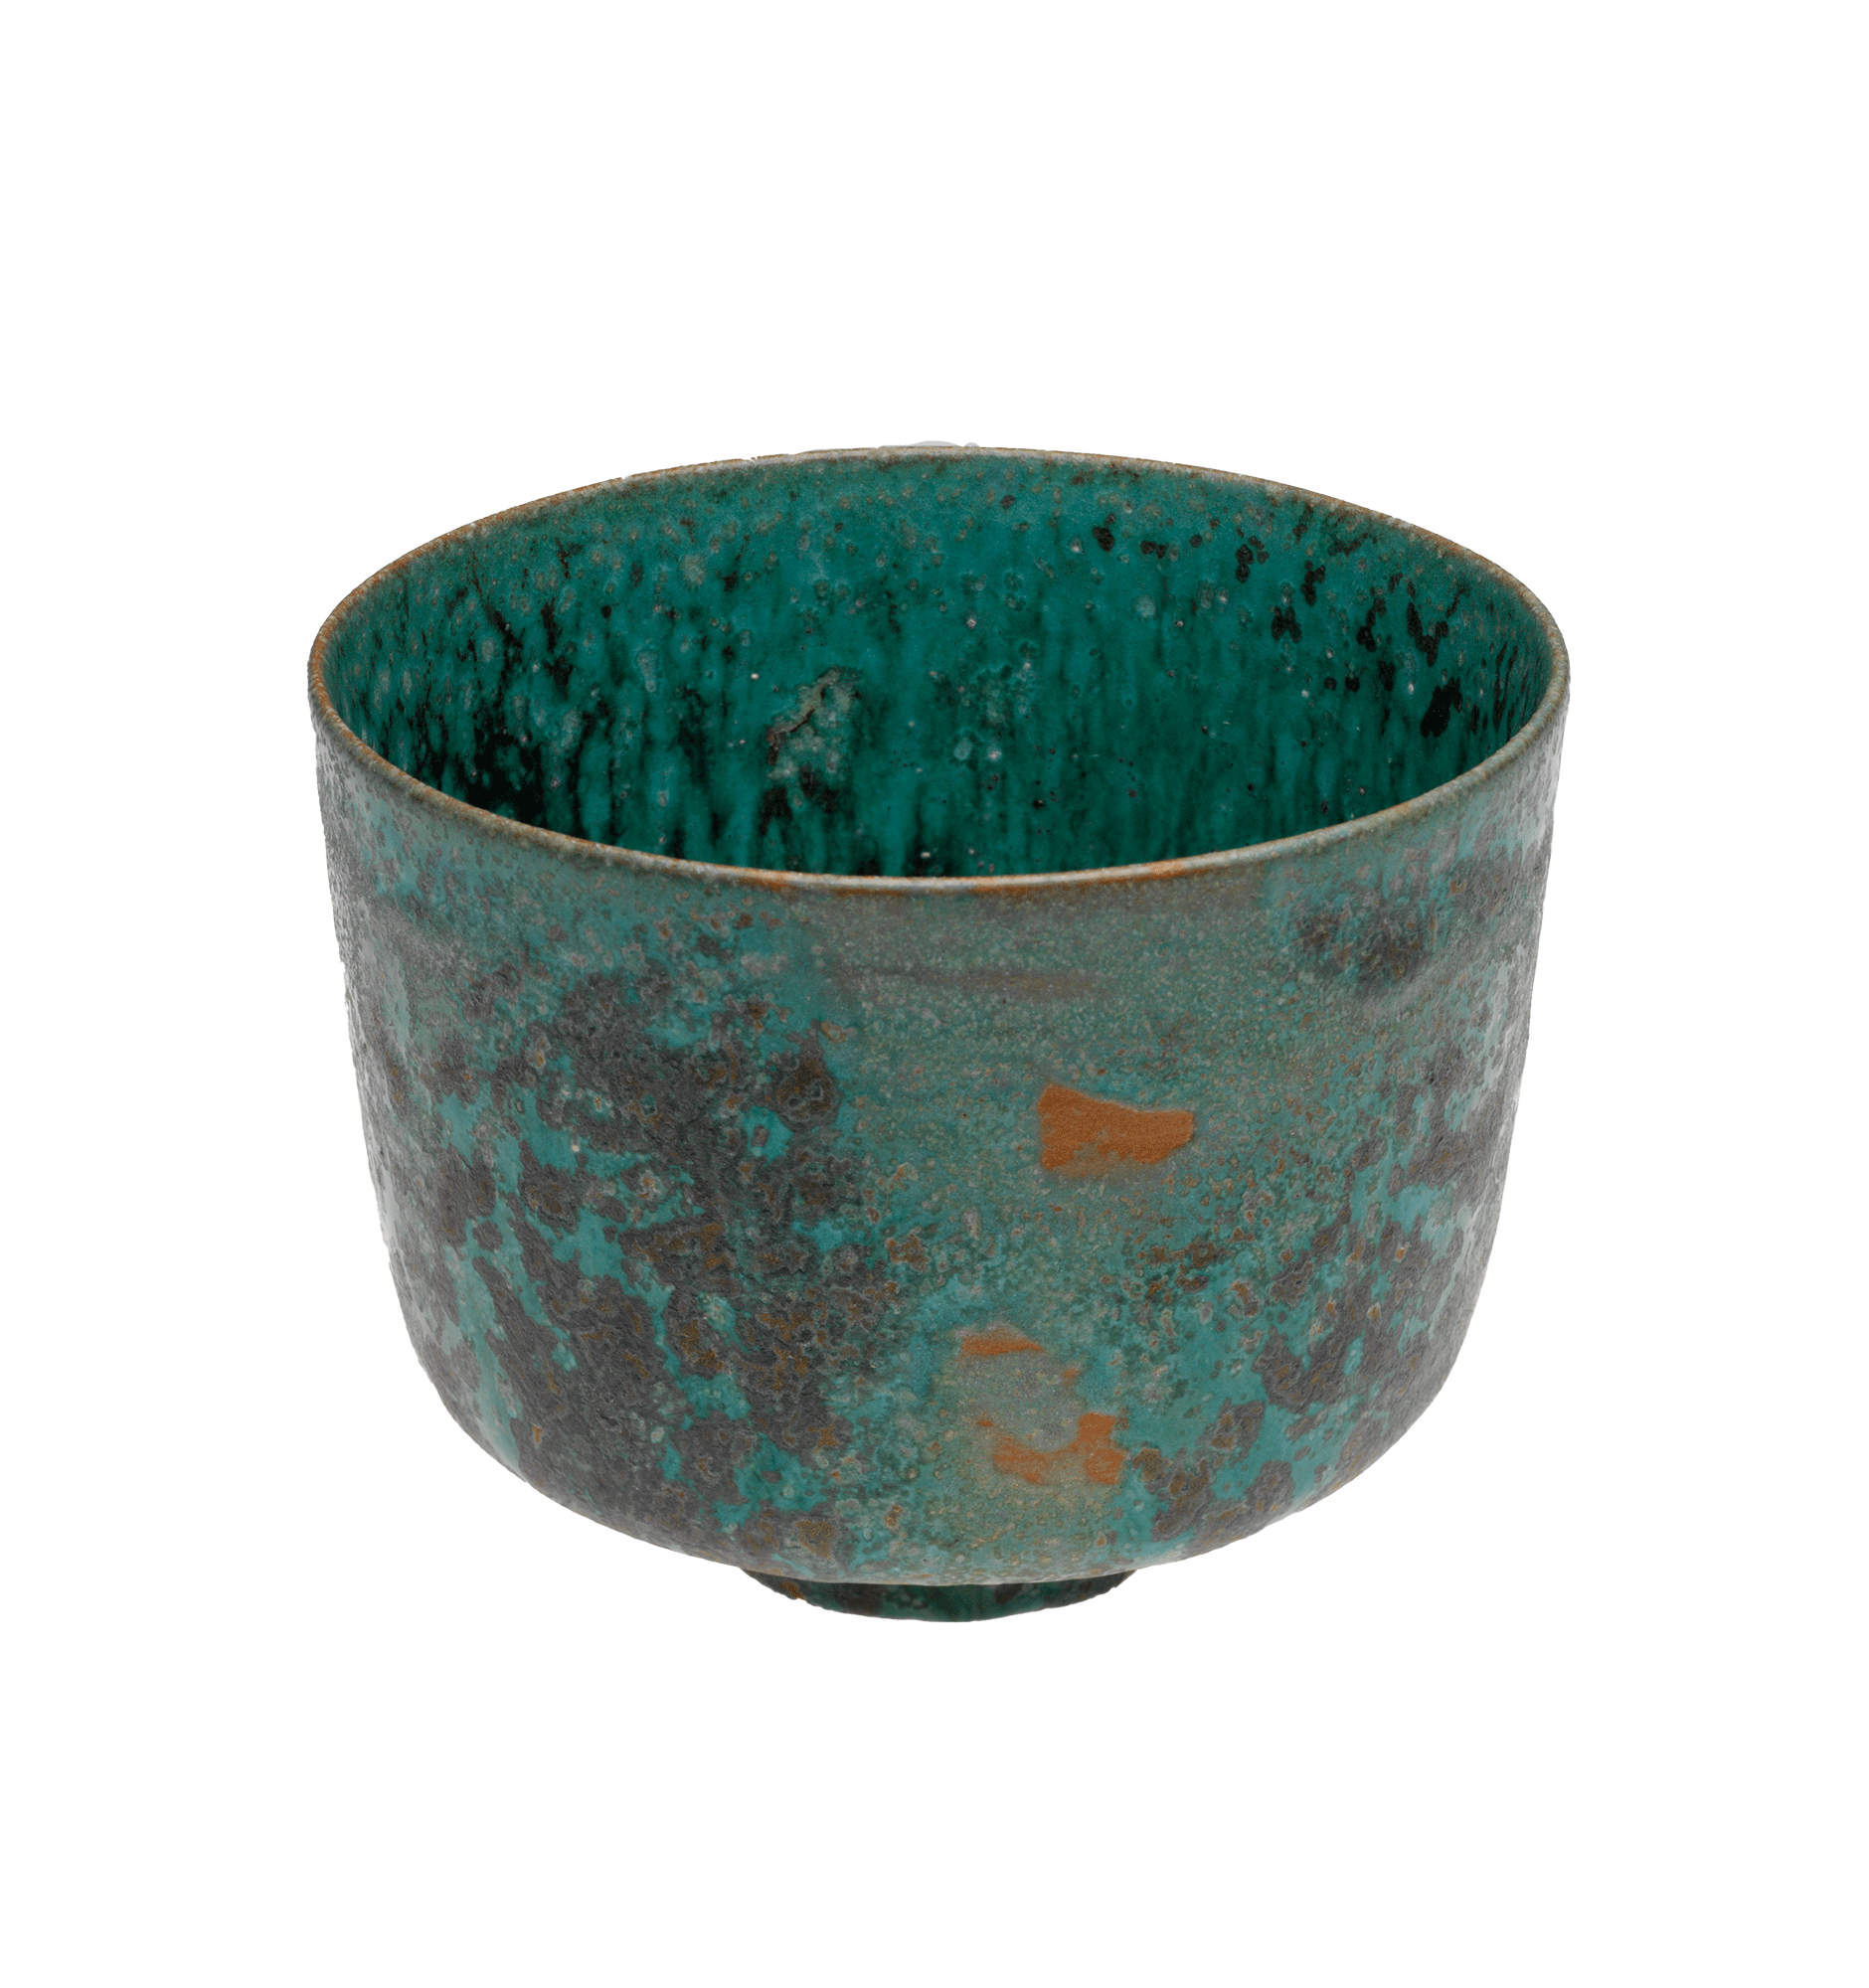 /Thin-edged%20turquoise%20bowl%2C%20resting%20on%20a%20small%20round%20foot%2C%20with%20large%20splotches%20of%20dark%20blue%20on%20the%20sides.%20There%20are%20three%20small%20irregular%20orange%20marks%20in%20the%20center.